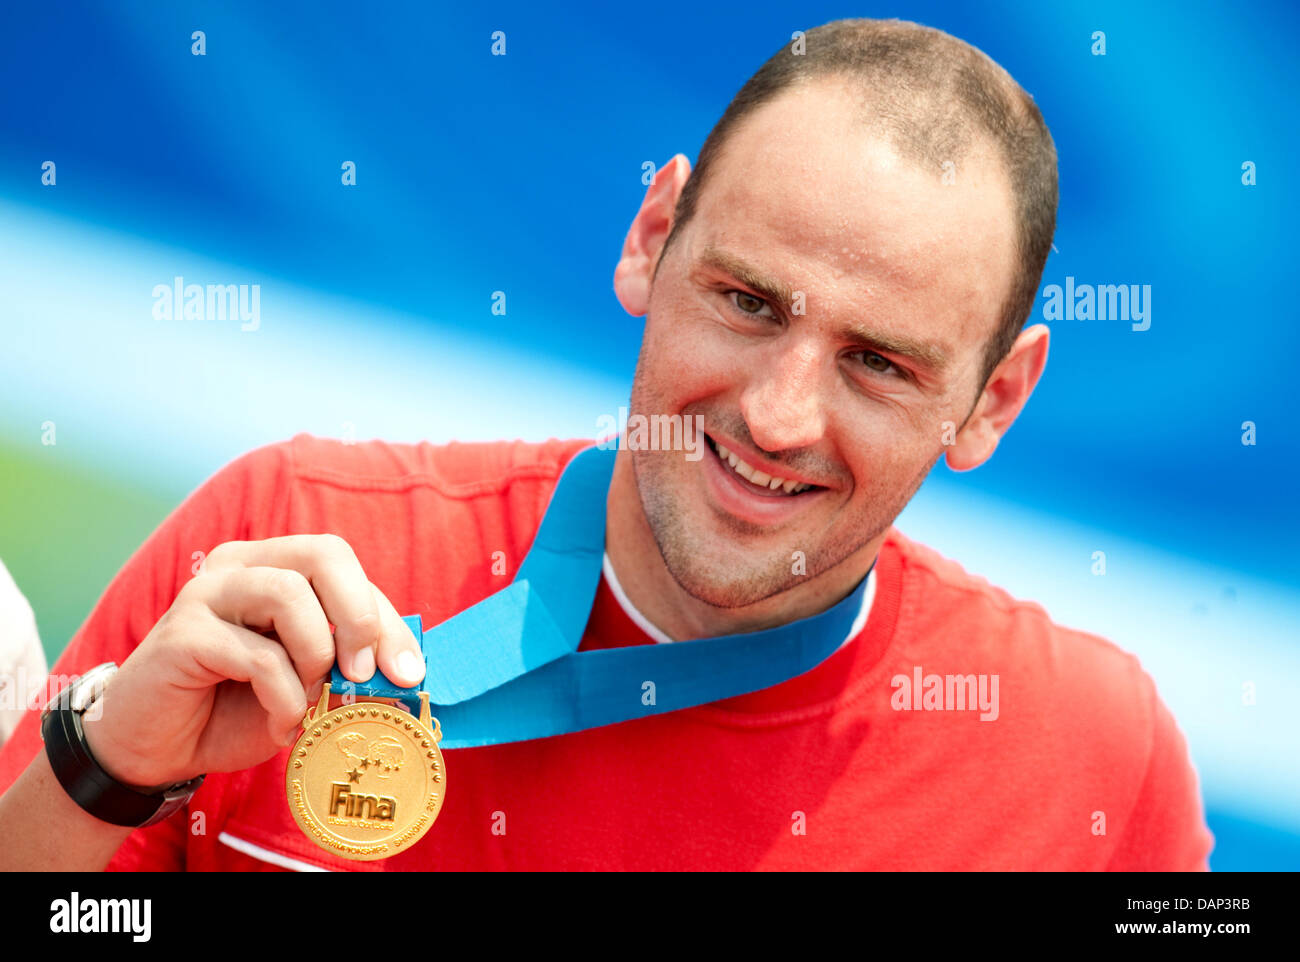 Petar Stoychev of Bulgaria shows his gold medal after finishing first place in the men's 25 km open water event at the 2011 FINA World Swimming Championships, Shanghai, China, 23 July 2011. Photo: Bernd Thissen dpa  +++(c) dpa - Bildfunk+++ Stock Photo